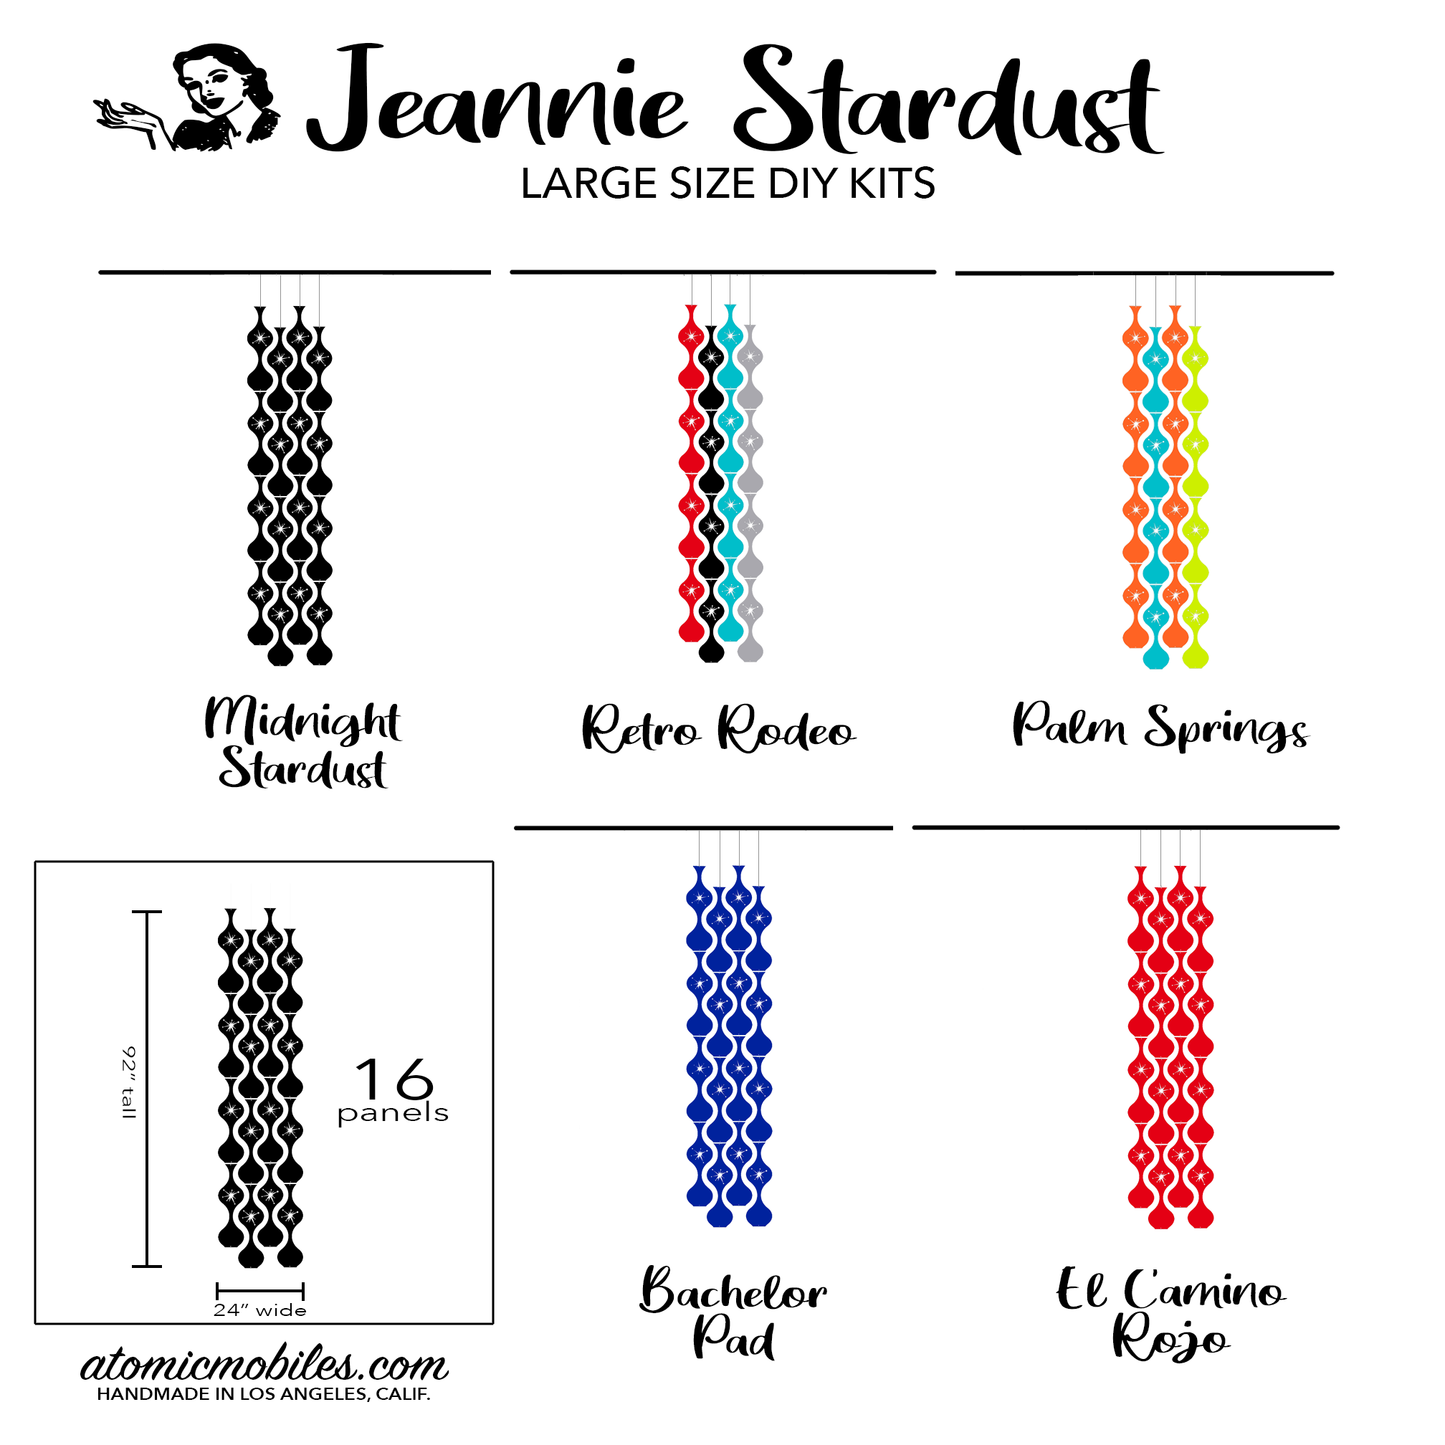 Jeannie Stardust Mid Century Modern retro room divider panels DIY Kit Large Size - by AtomicMobiles.com